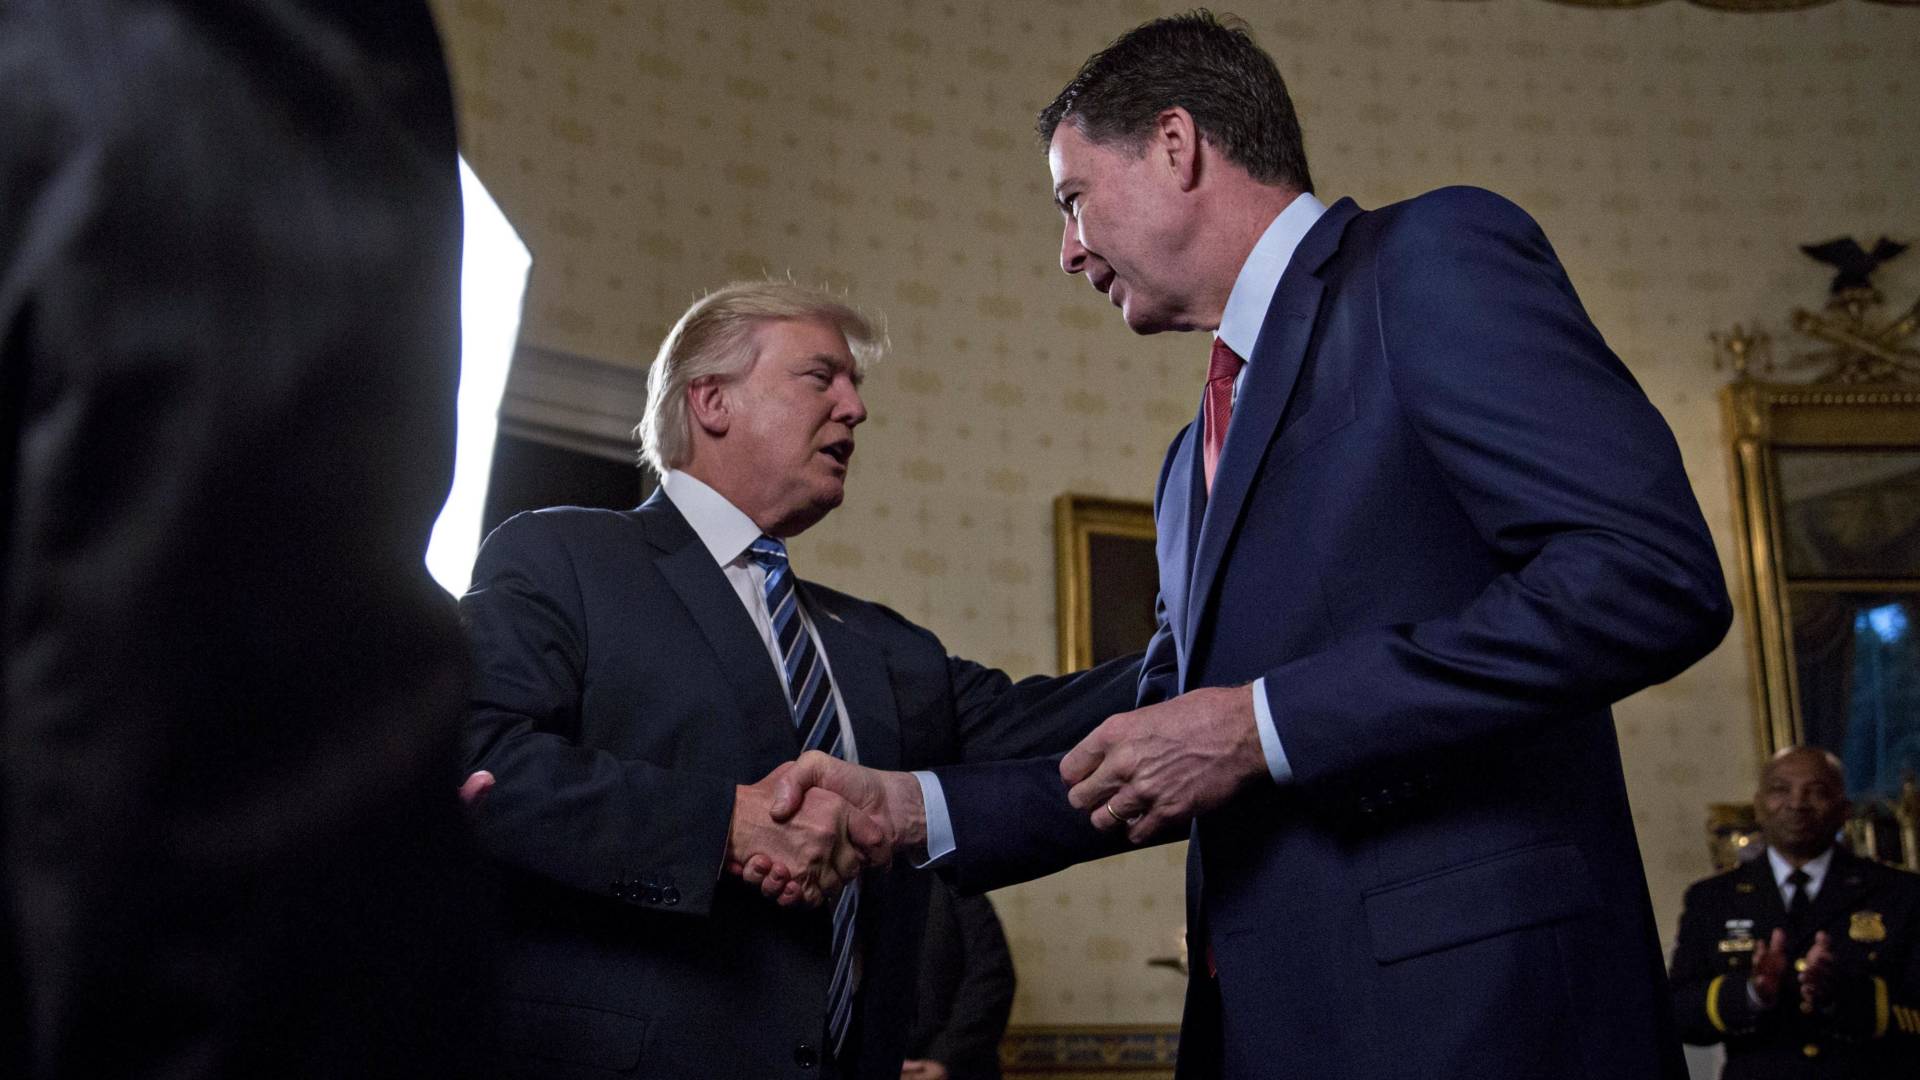 The broad portrait James Comey tries to paint is of President Trump as a president so far outside democratic norms that he is a danger to the republic as he spouts conspiracy theories and untruths regularly. Pool/Getty Images